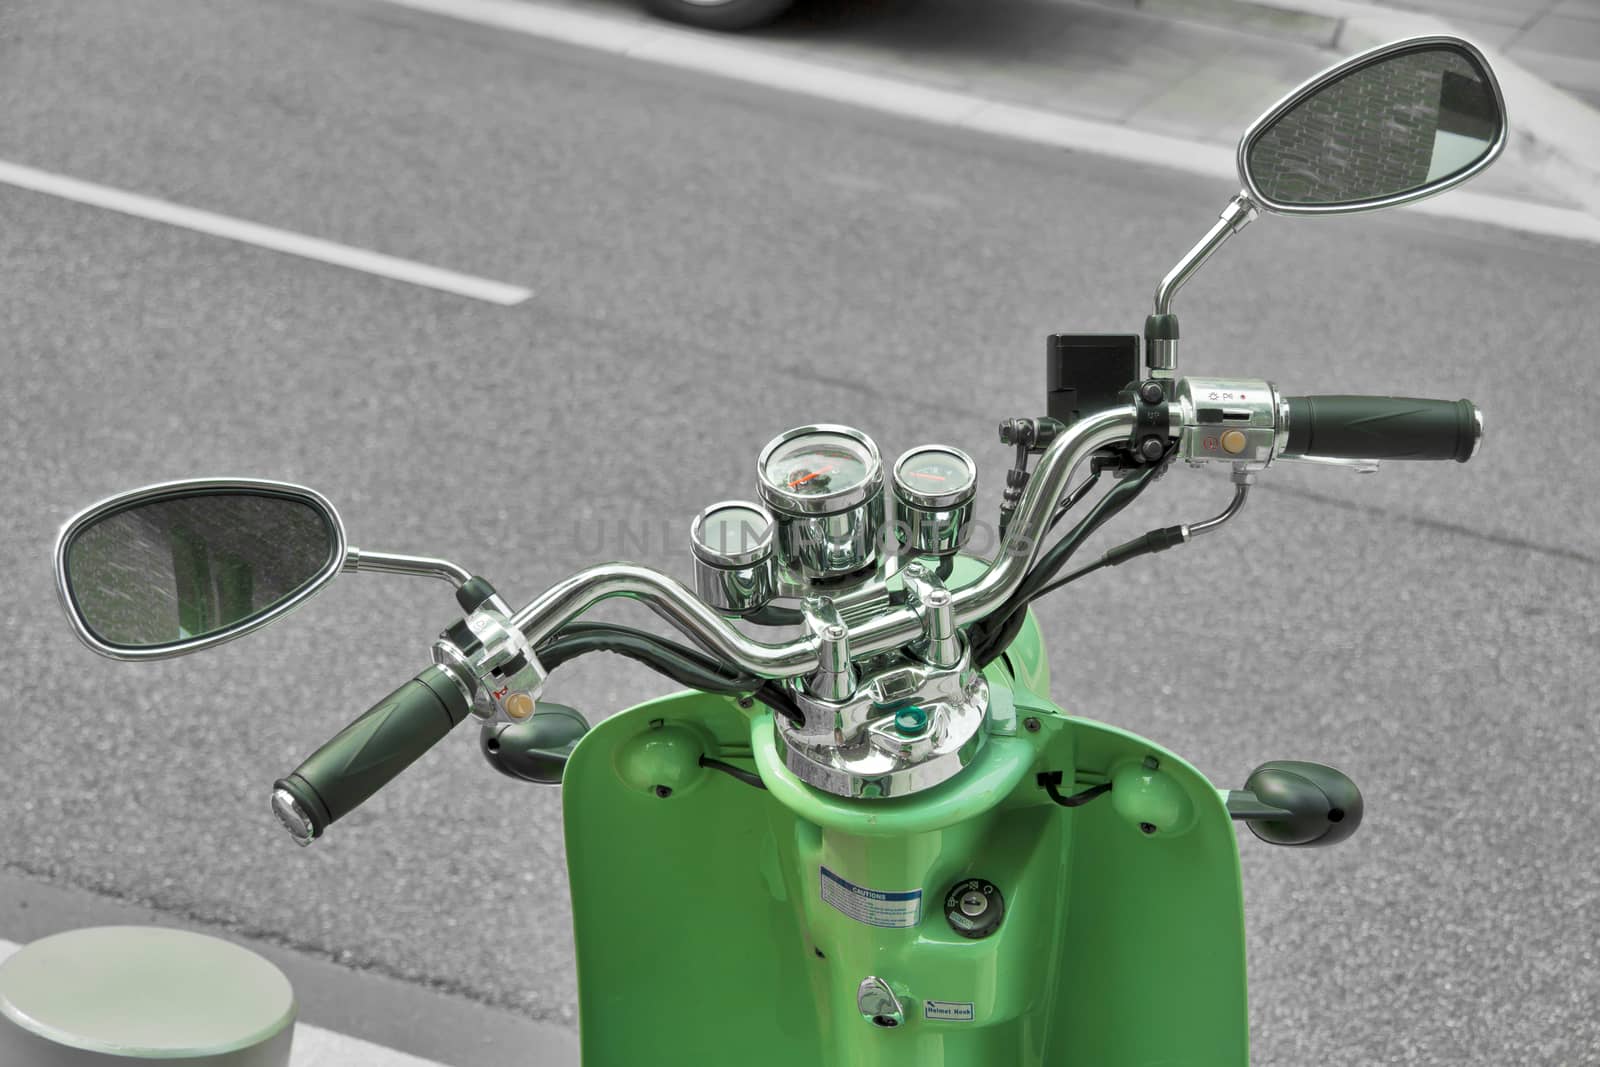 A green motor scooter is parked near the street.